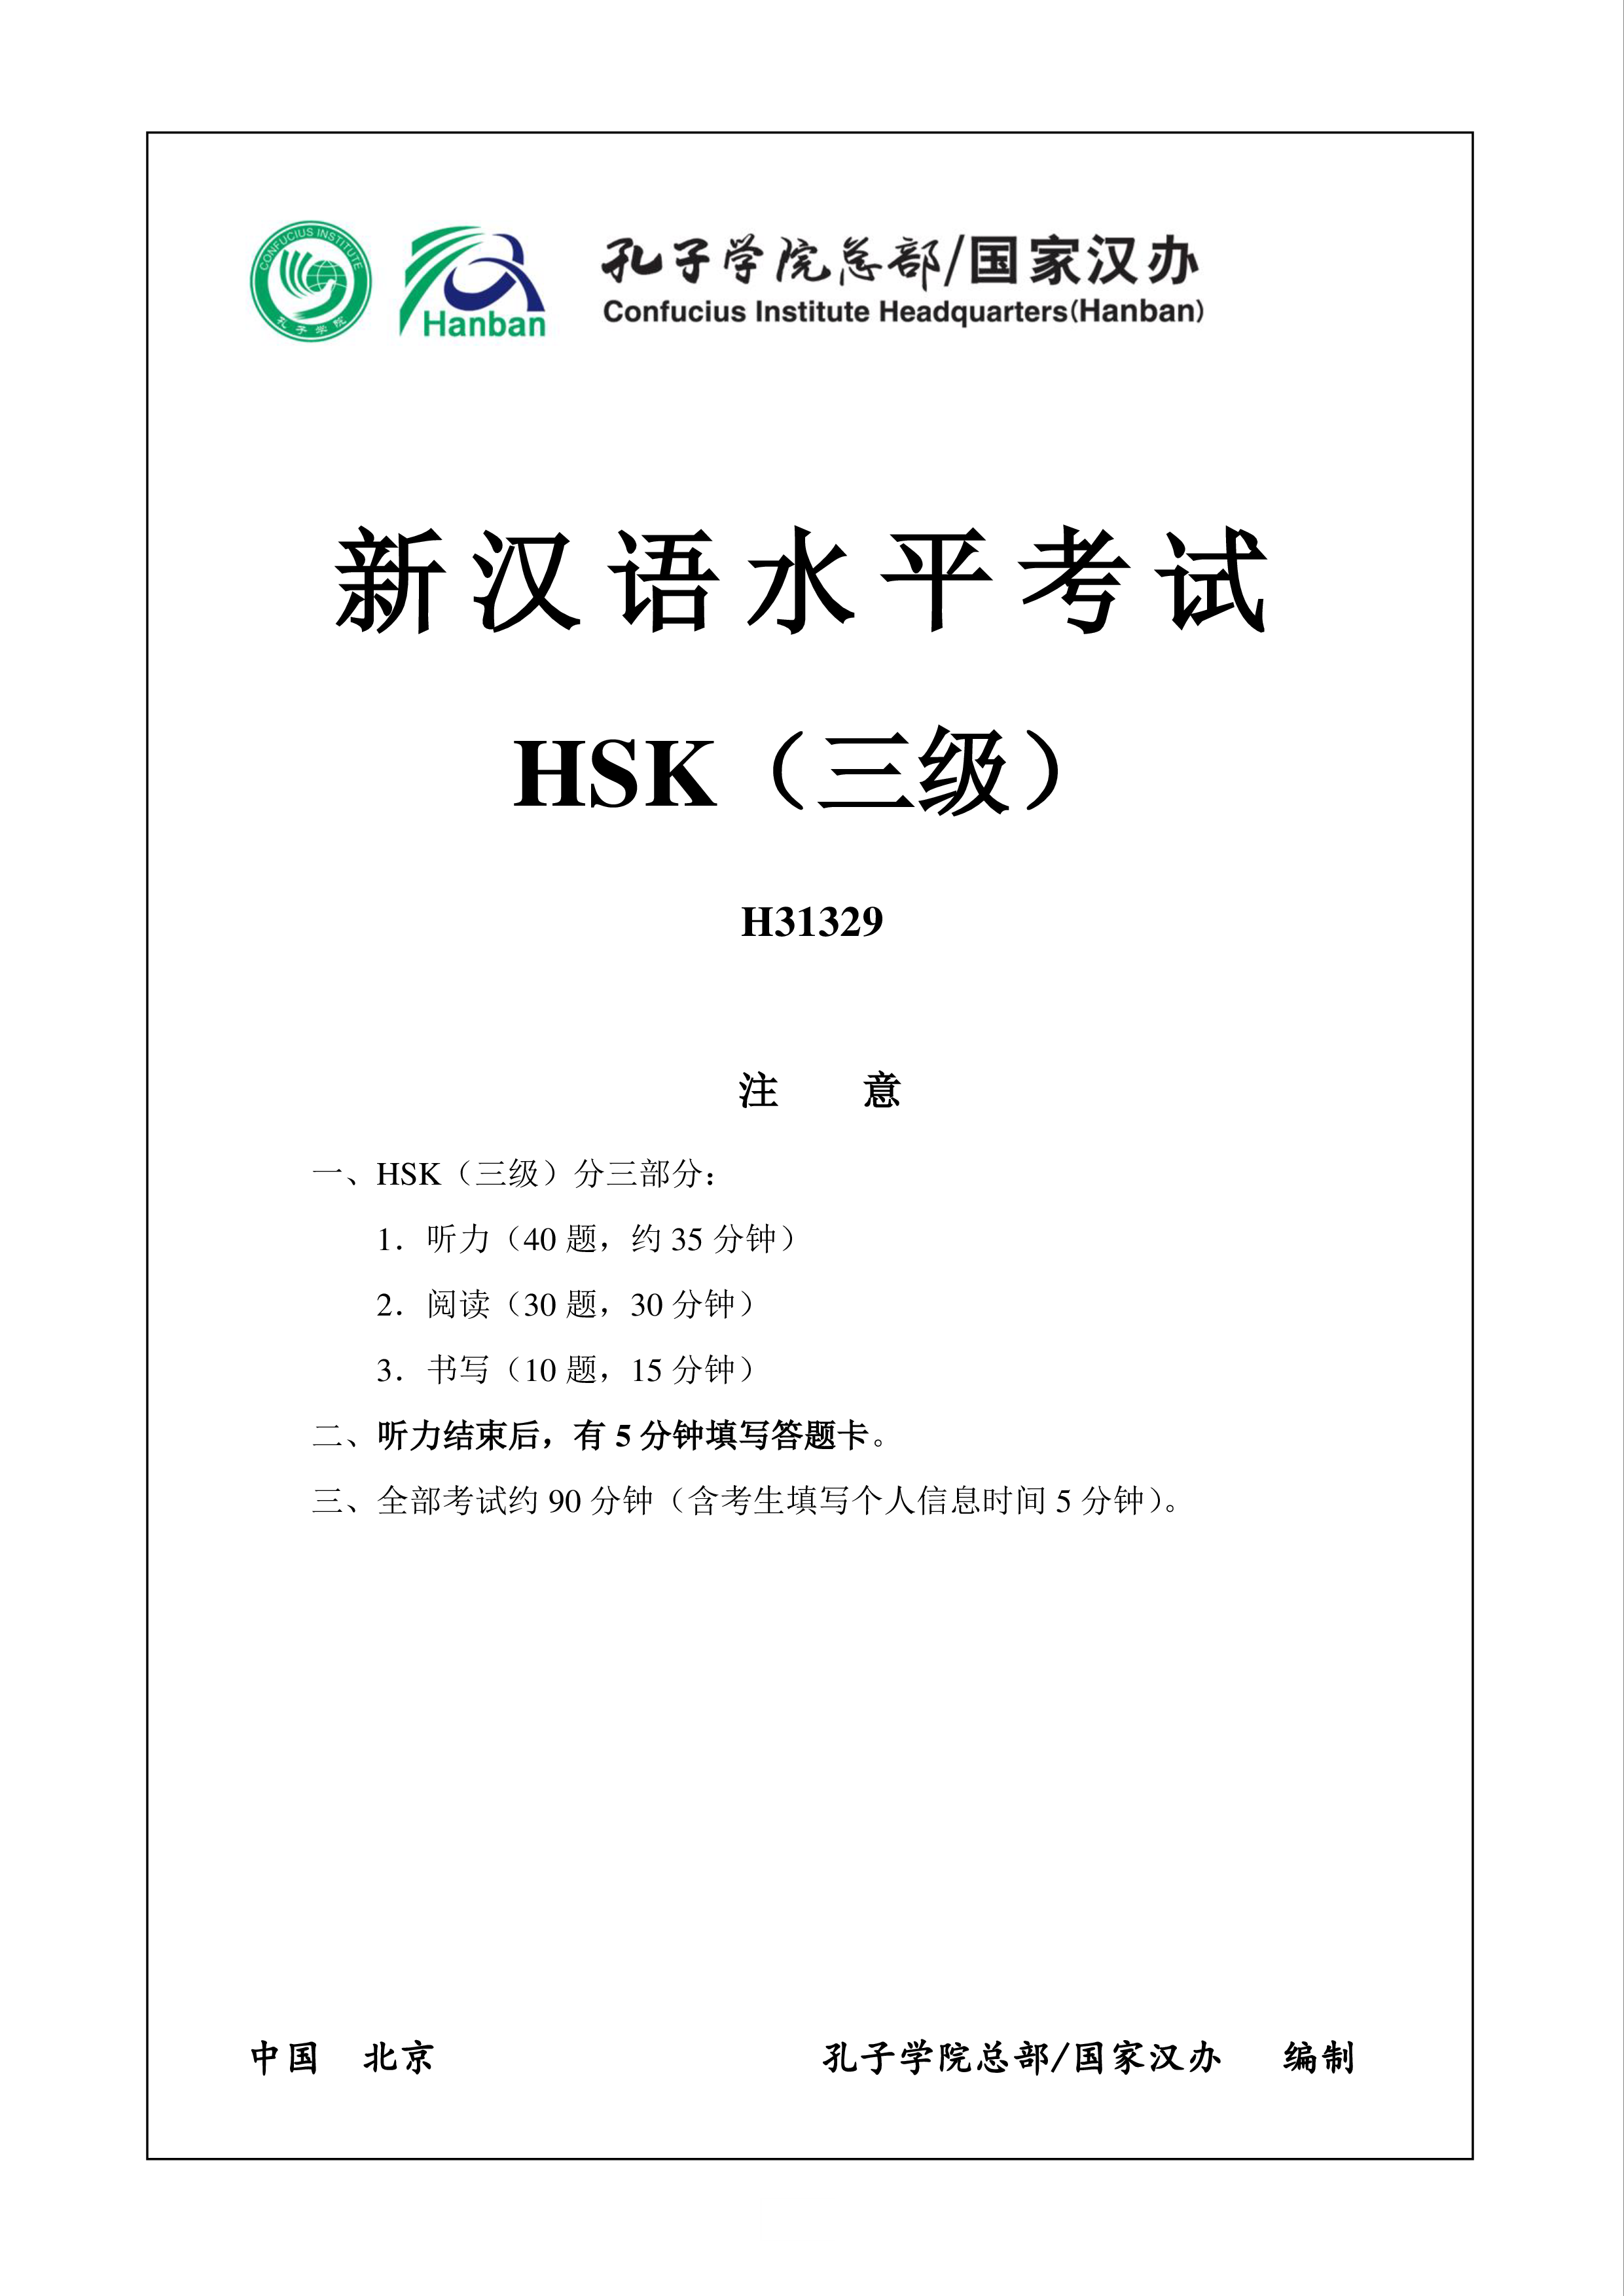 HSK3 Chinese Exam including Answers # H31329 main image